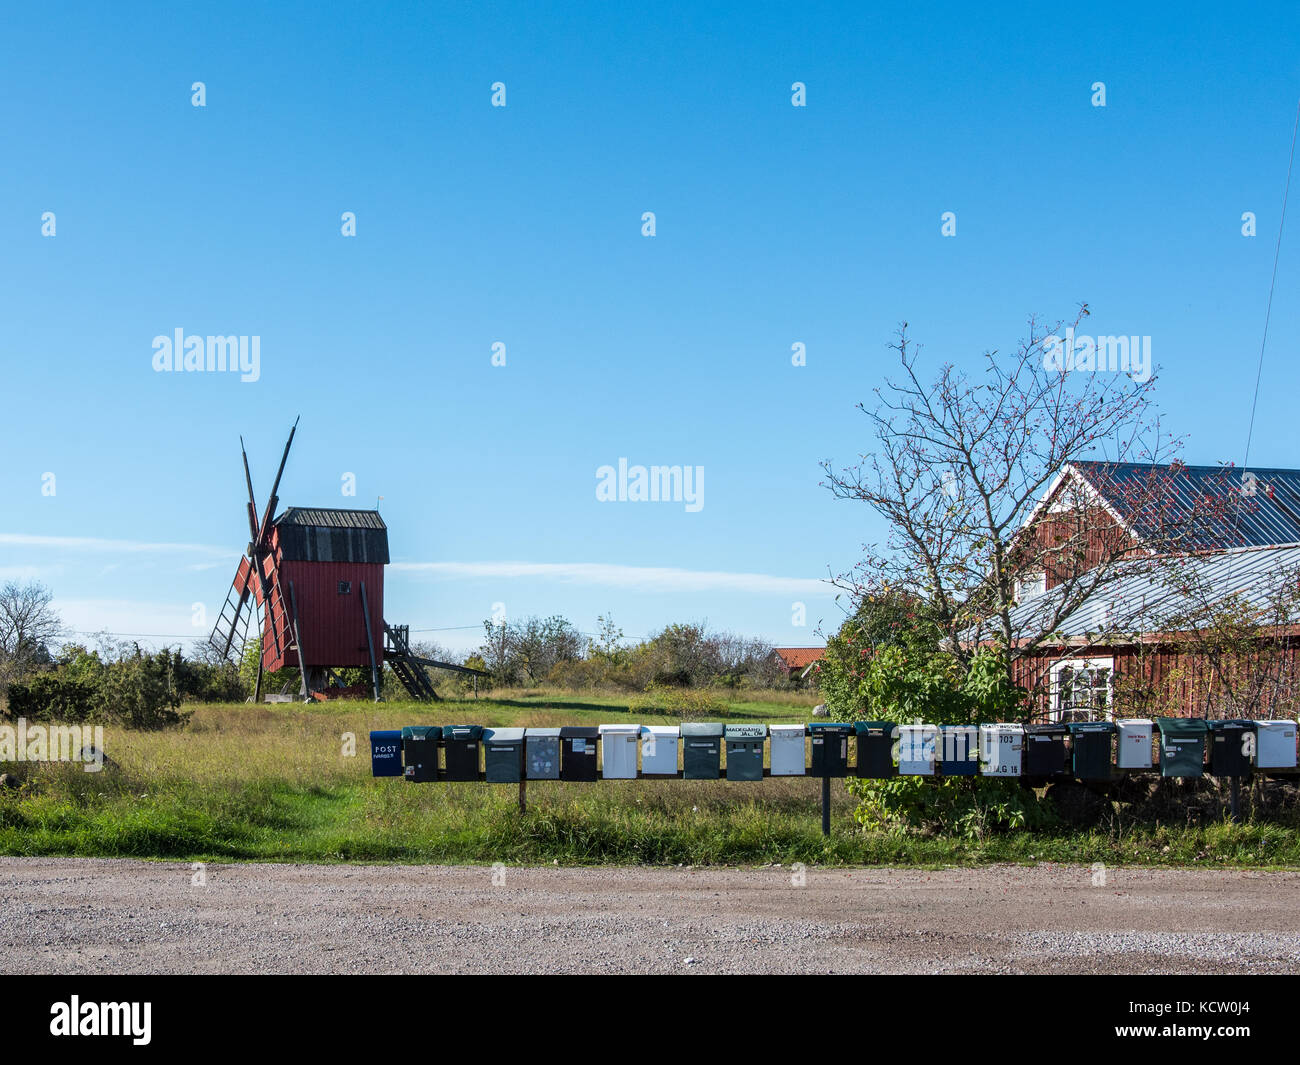 Traditional windmill on Swedish island Oland in the Baltic Sea. Windmills are a common sight on Oland. Stock Photo